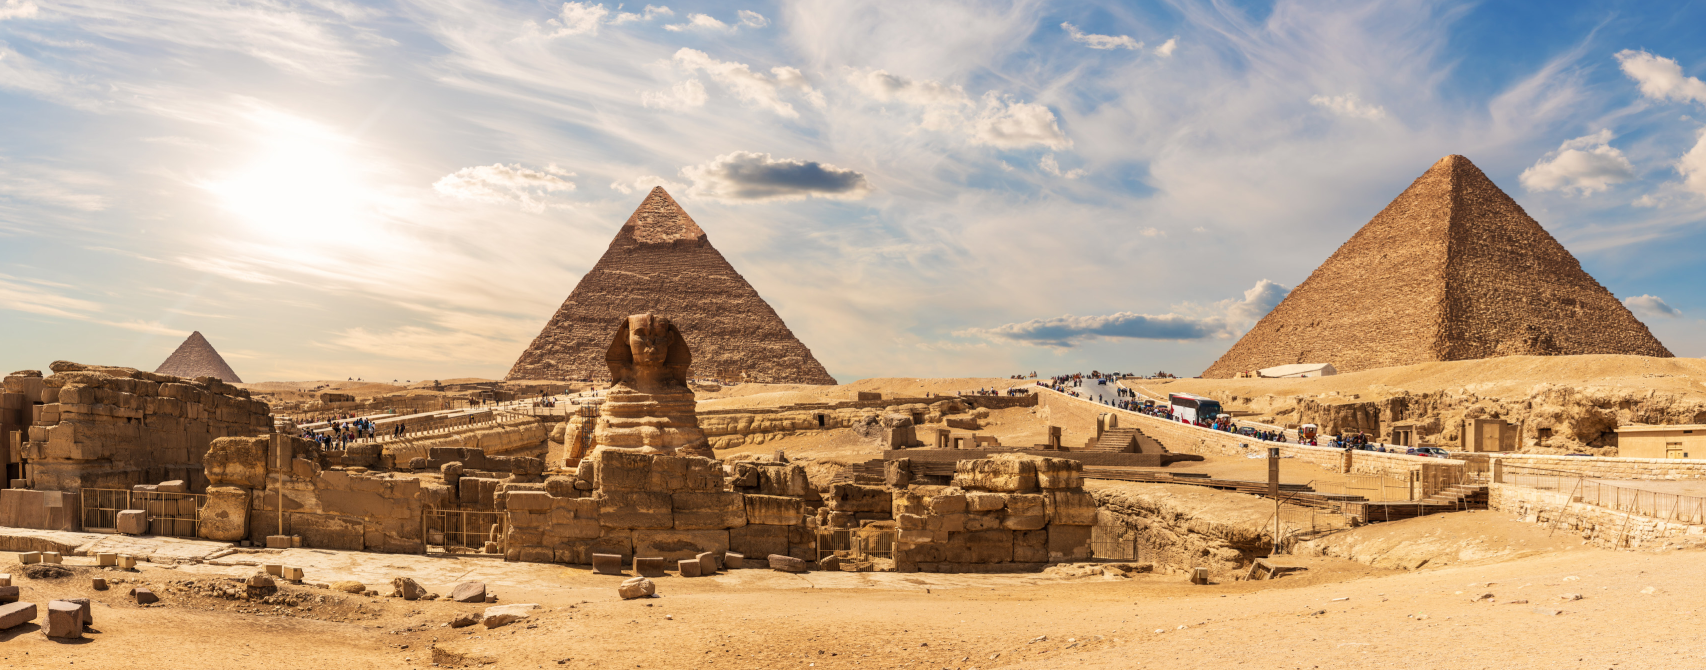 Amazing facts about the Great pyramid of Giza